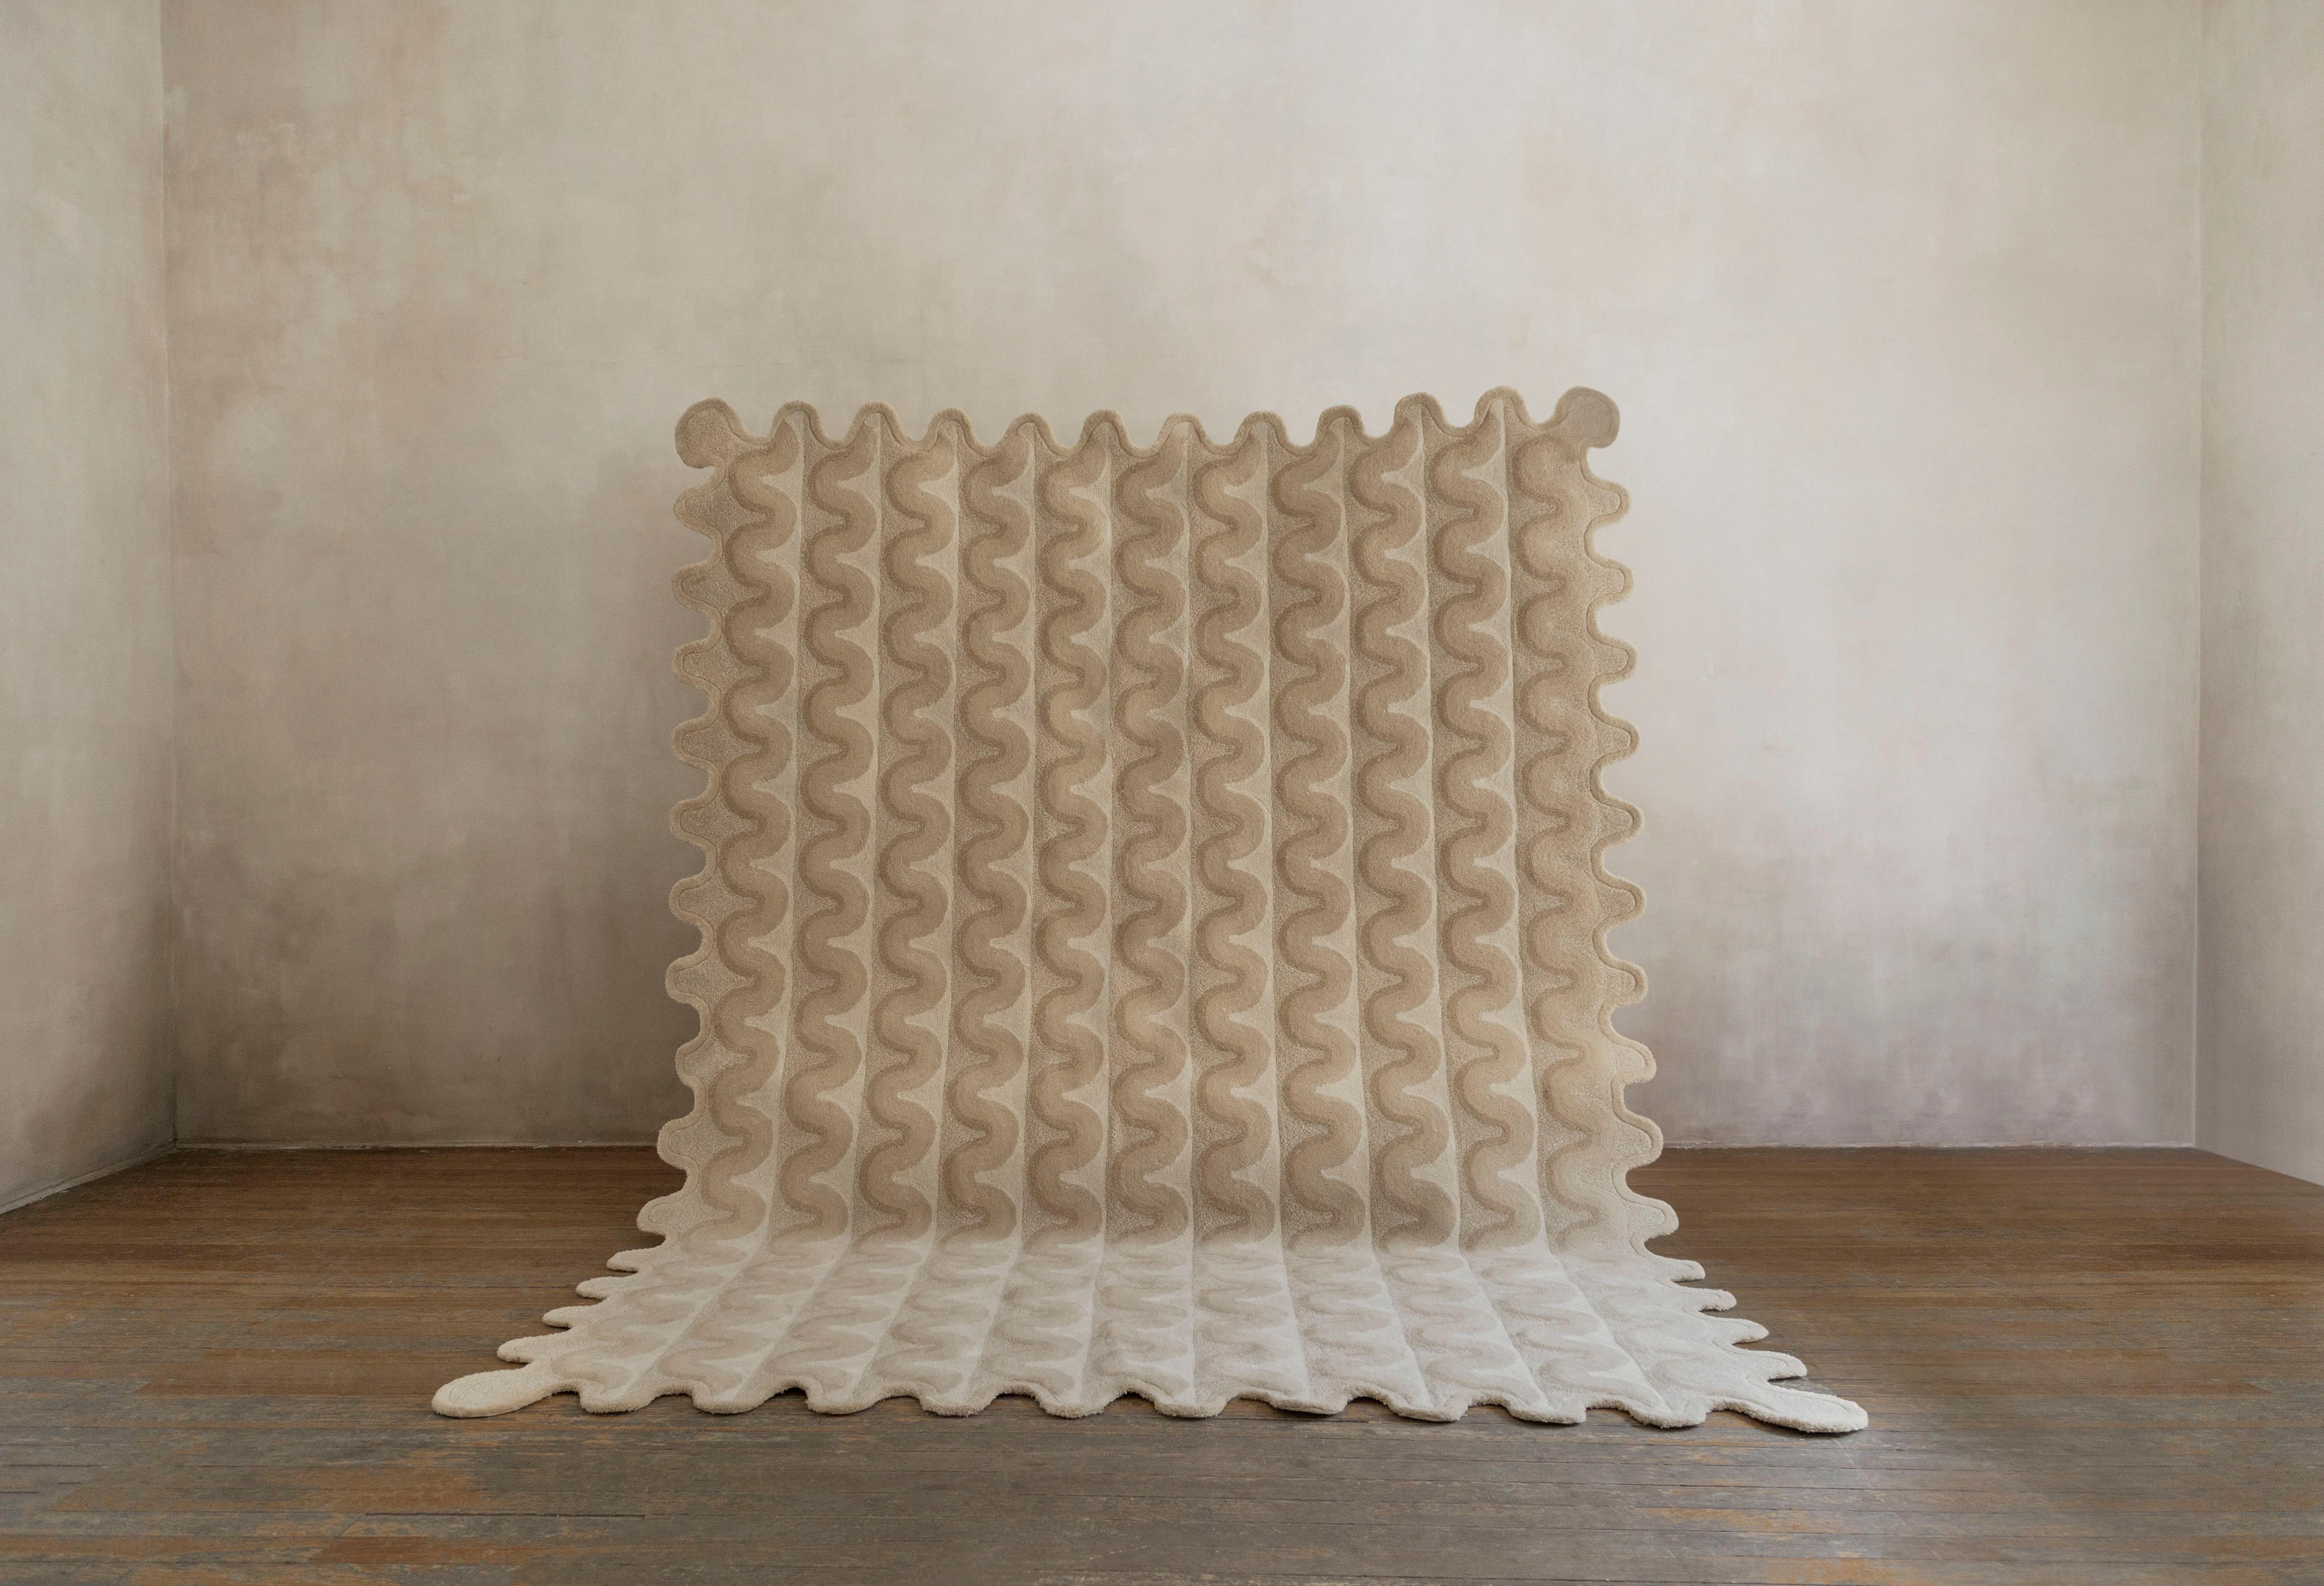 Samalayuca large rug by Brera Studio.
Limited Edition of 10 pieces.
Dimensions: W 304 x L 204 cm.
Materials: 100% wool.

Also available in medium size (W 225 x L 164 cm). Please contact us.

The Samalayuca Rug is a unique piece inspired by